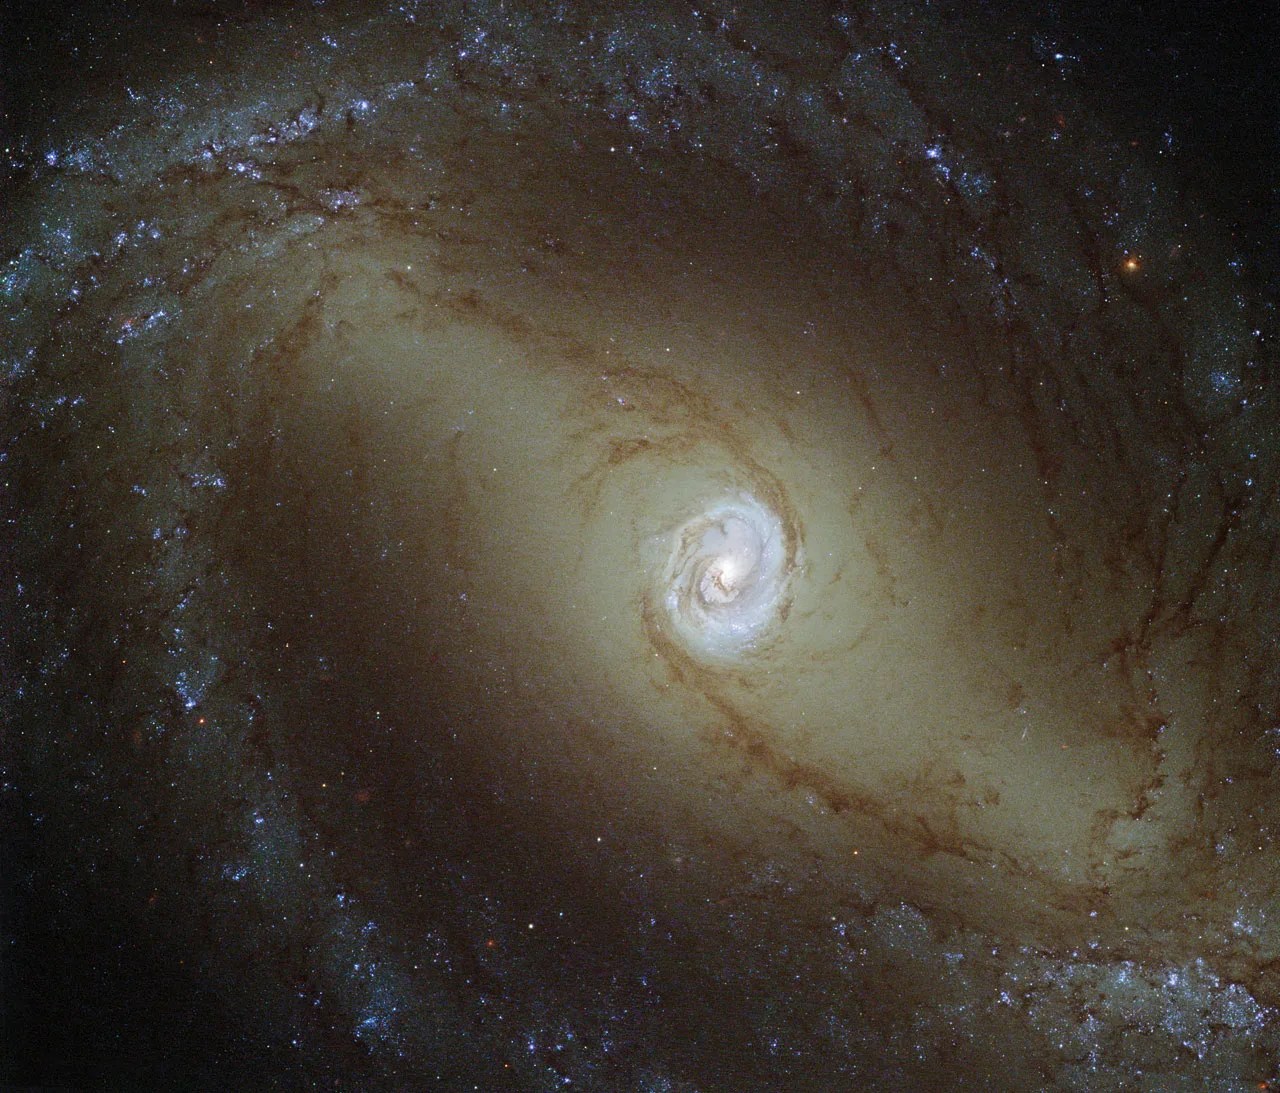 Oblong spiral arms streak outward from a central glowing bluish heart